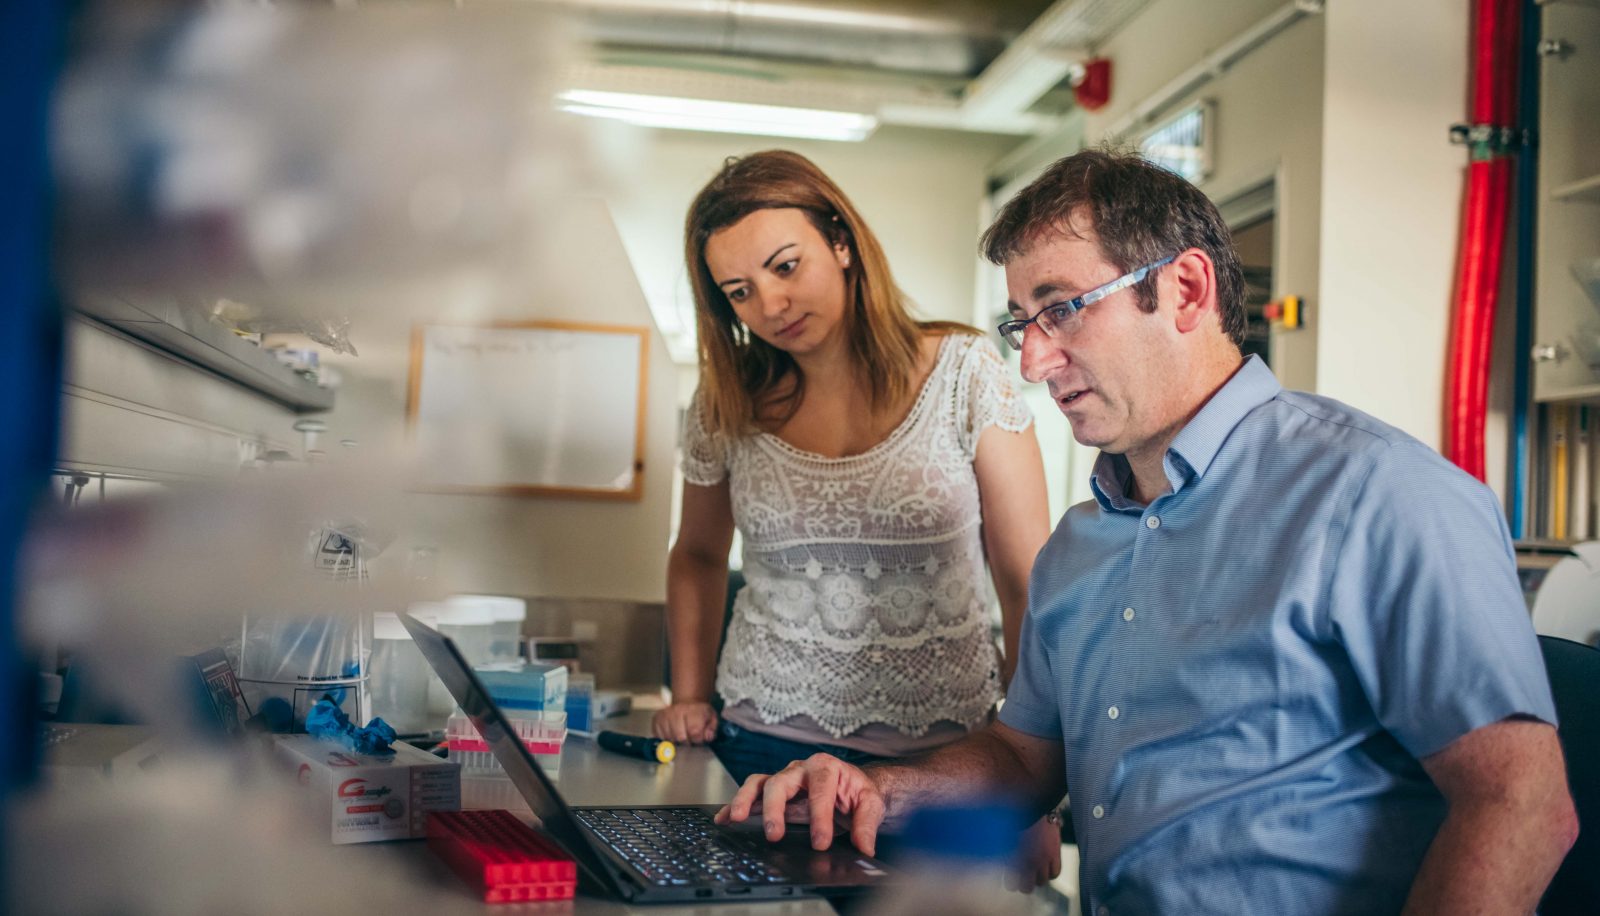 Professor Shai Shen-Orr with a student looking at a laptop in a Technion lab.